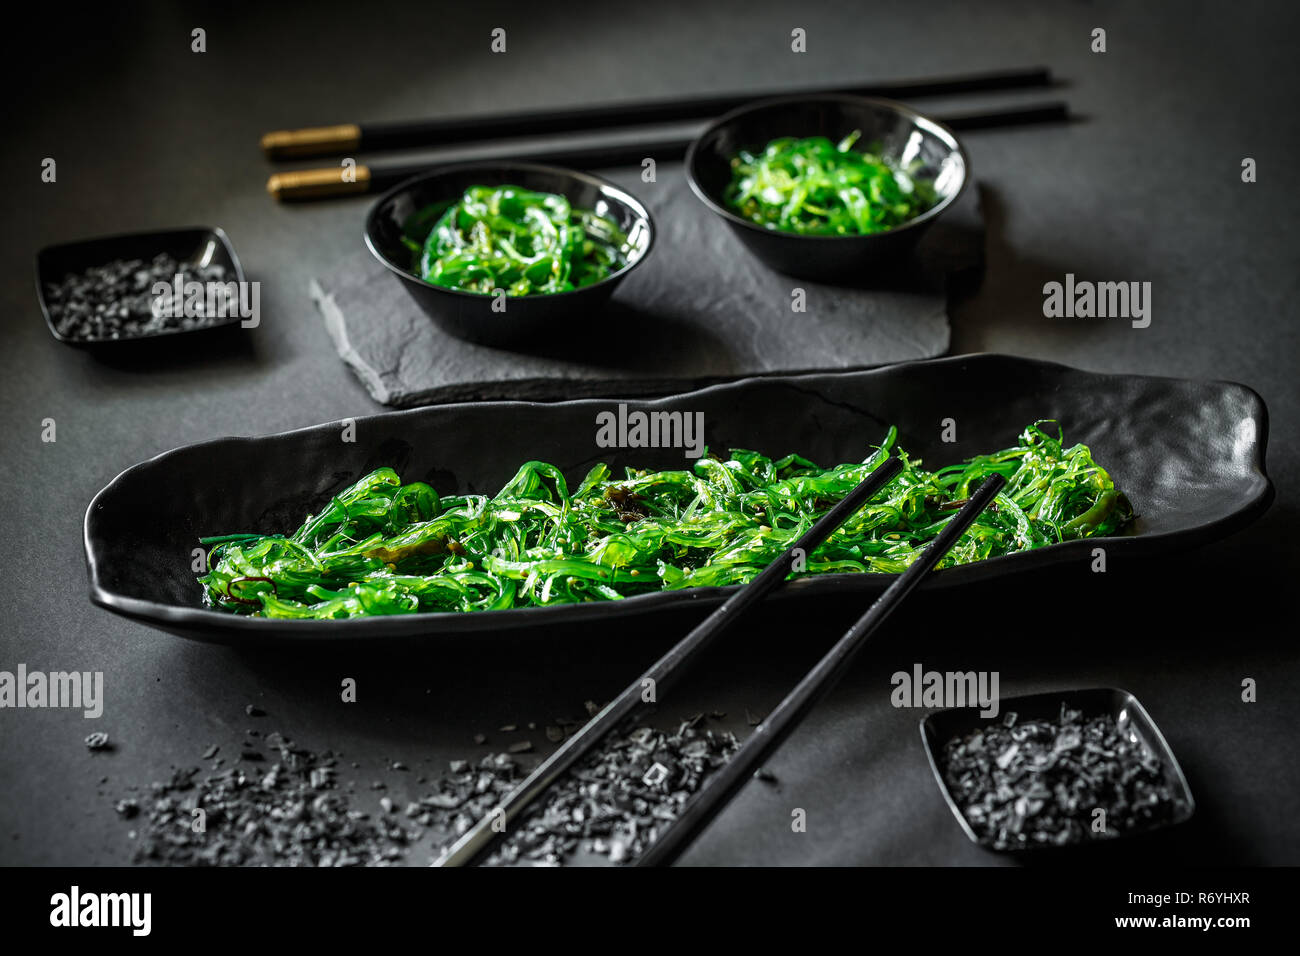 Pickled spicy seaweed Stock Photo